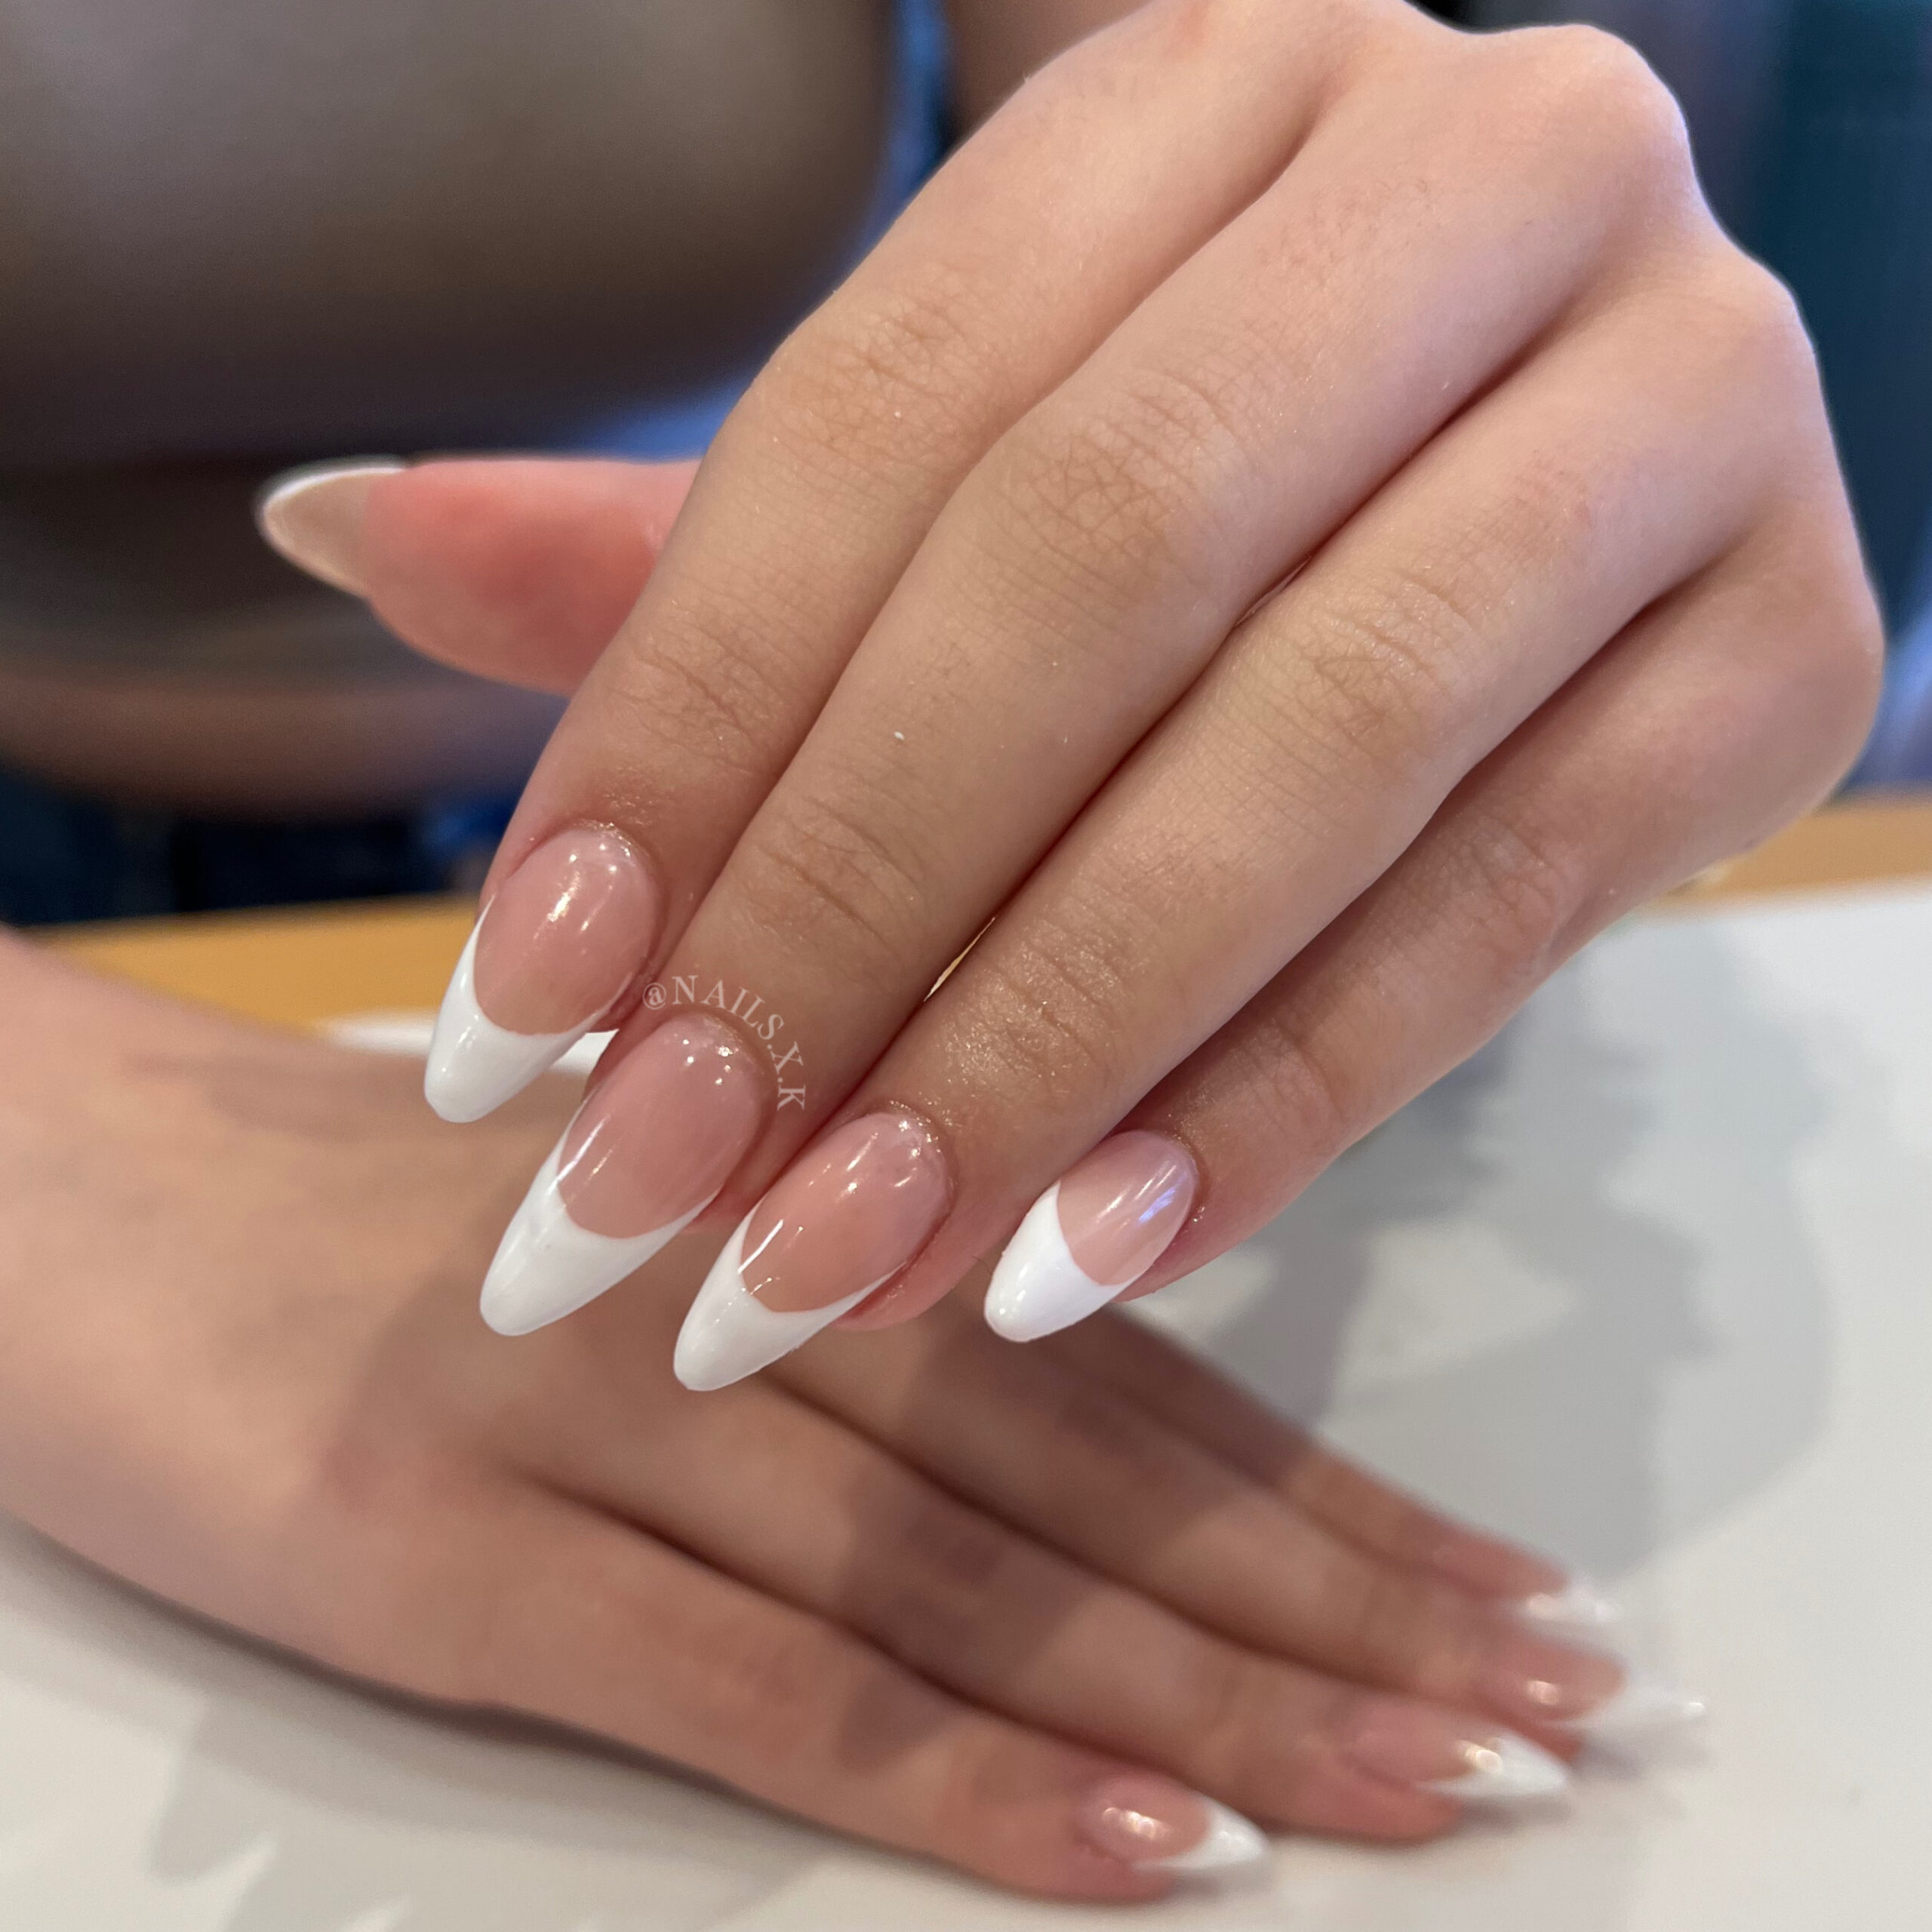 Acrylic fill with classic french tips. Nails by K